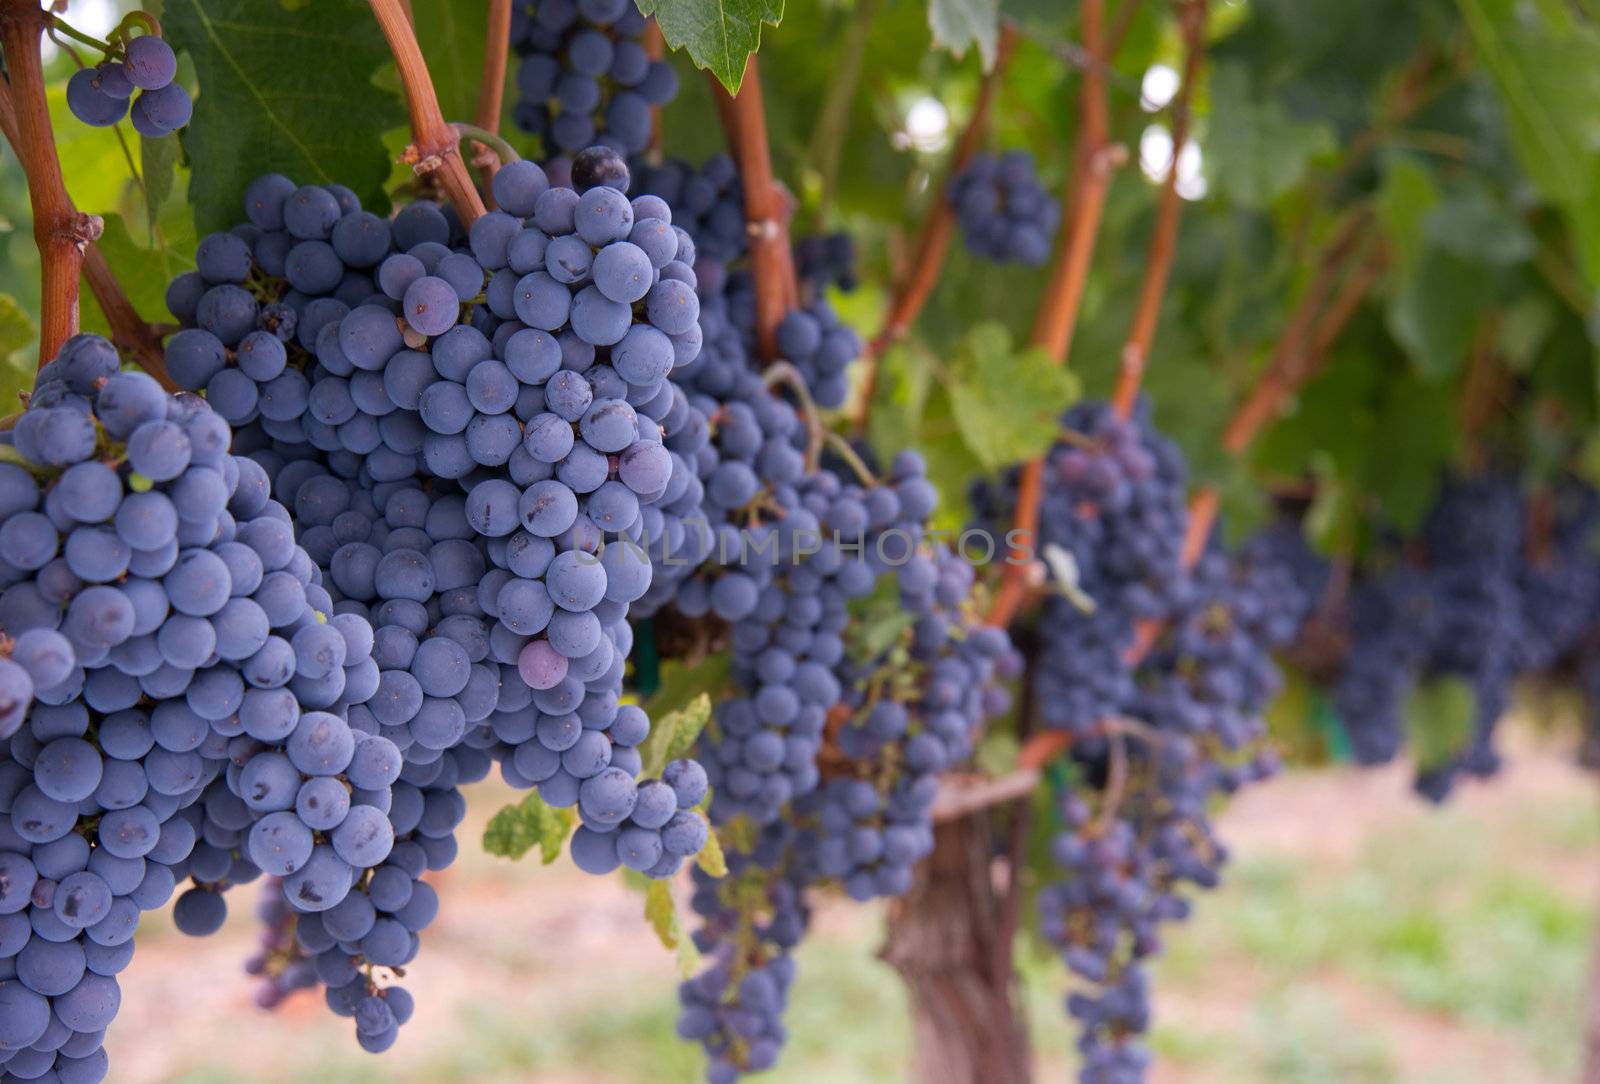 Grapes on the Vine by ChrisBoswell